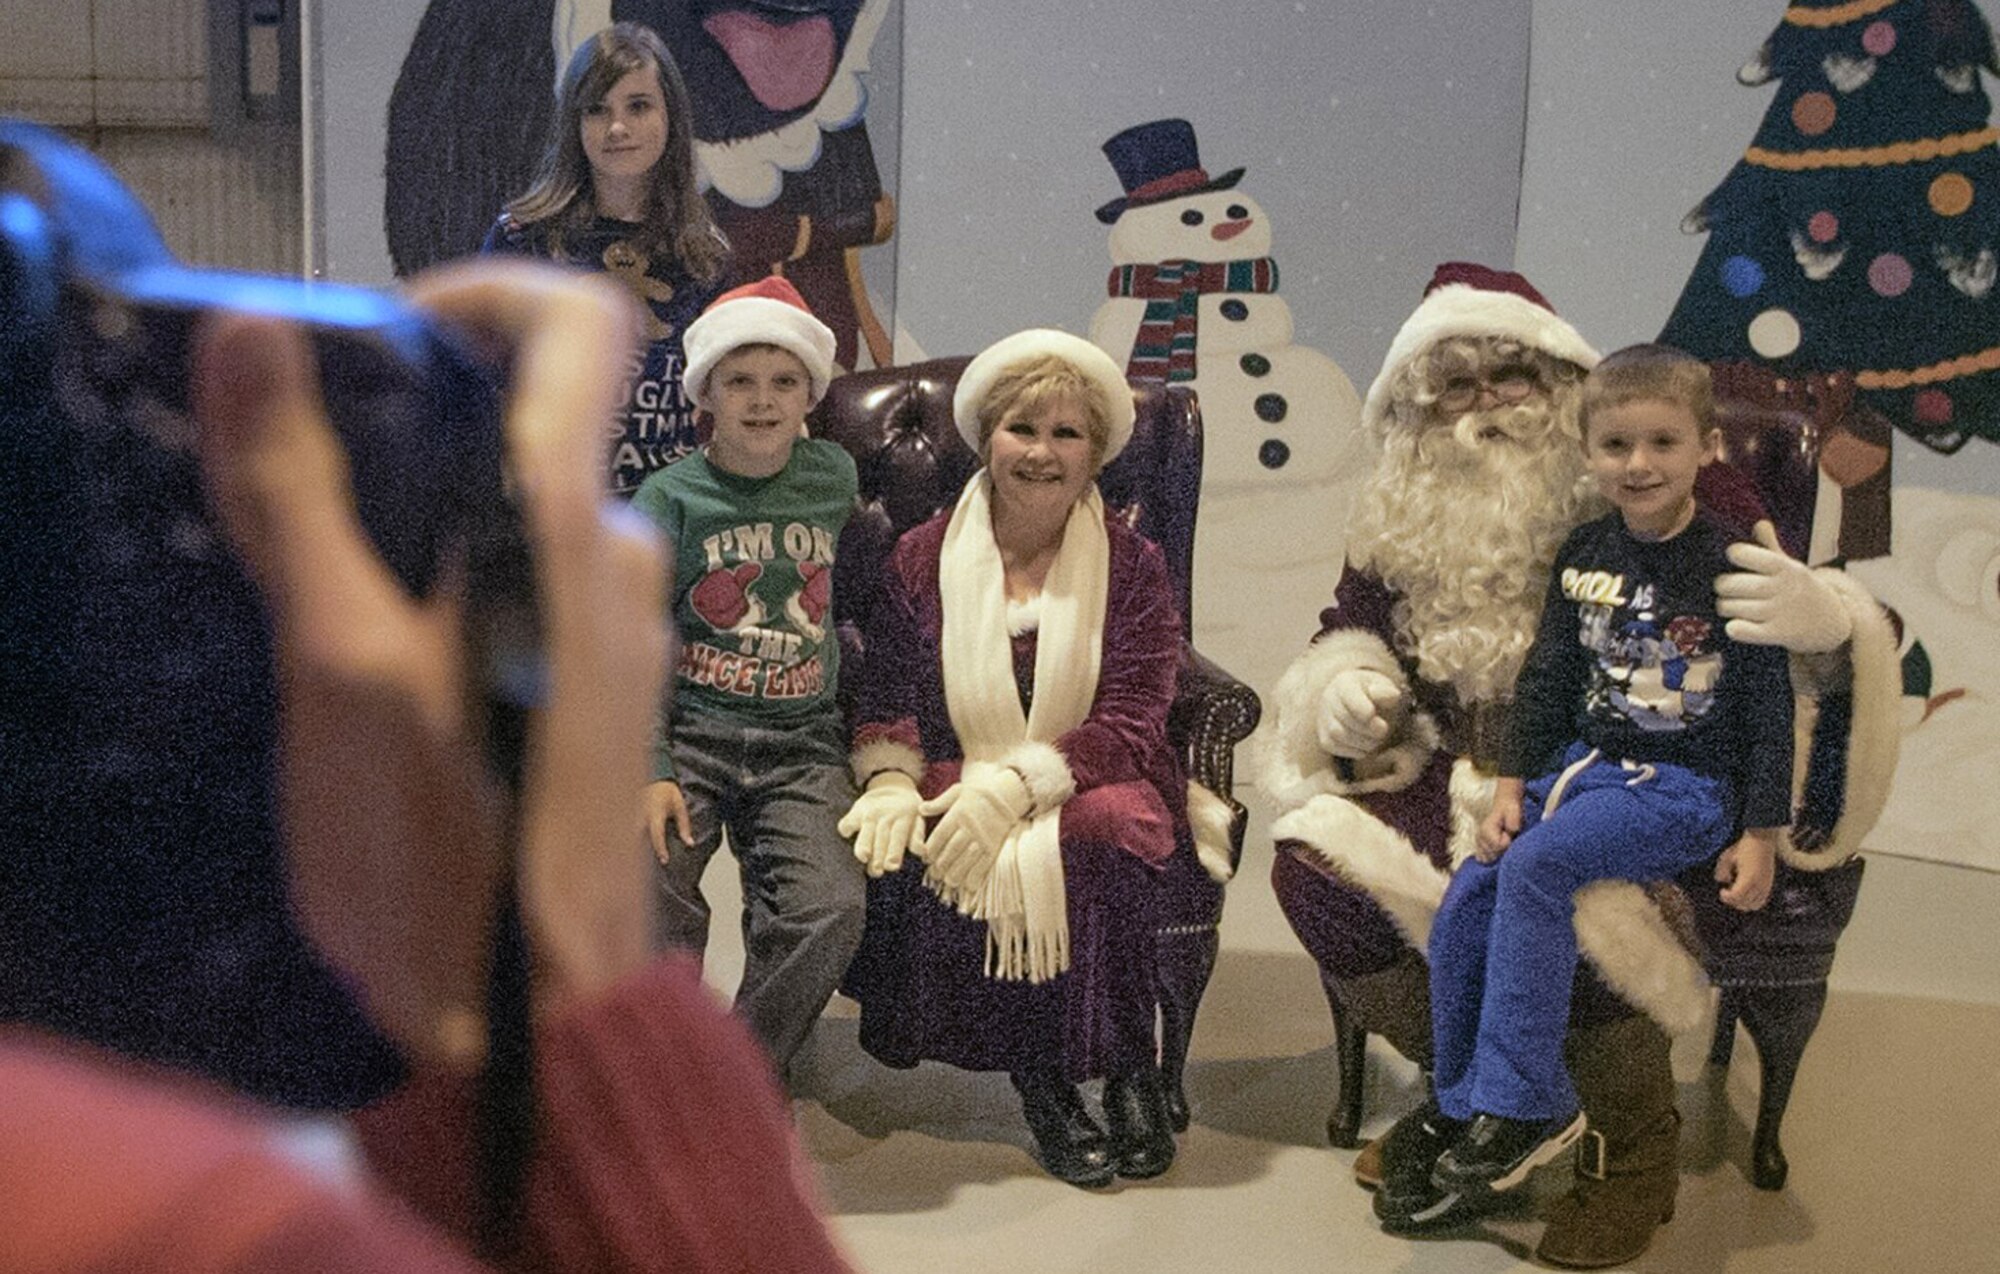 Santa and Mrs. Claus visited with Team Vance children Dec. 10 during "Snapshots with Santa" in Hangar 170, at Vance Air Force Base, Oklahoma. (U.S. Air Force photo/ David Poe)